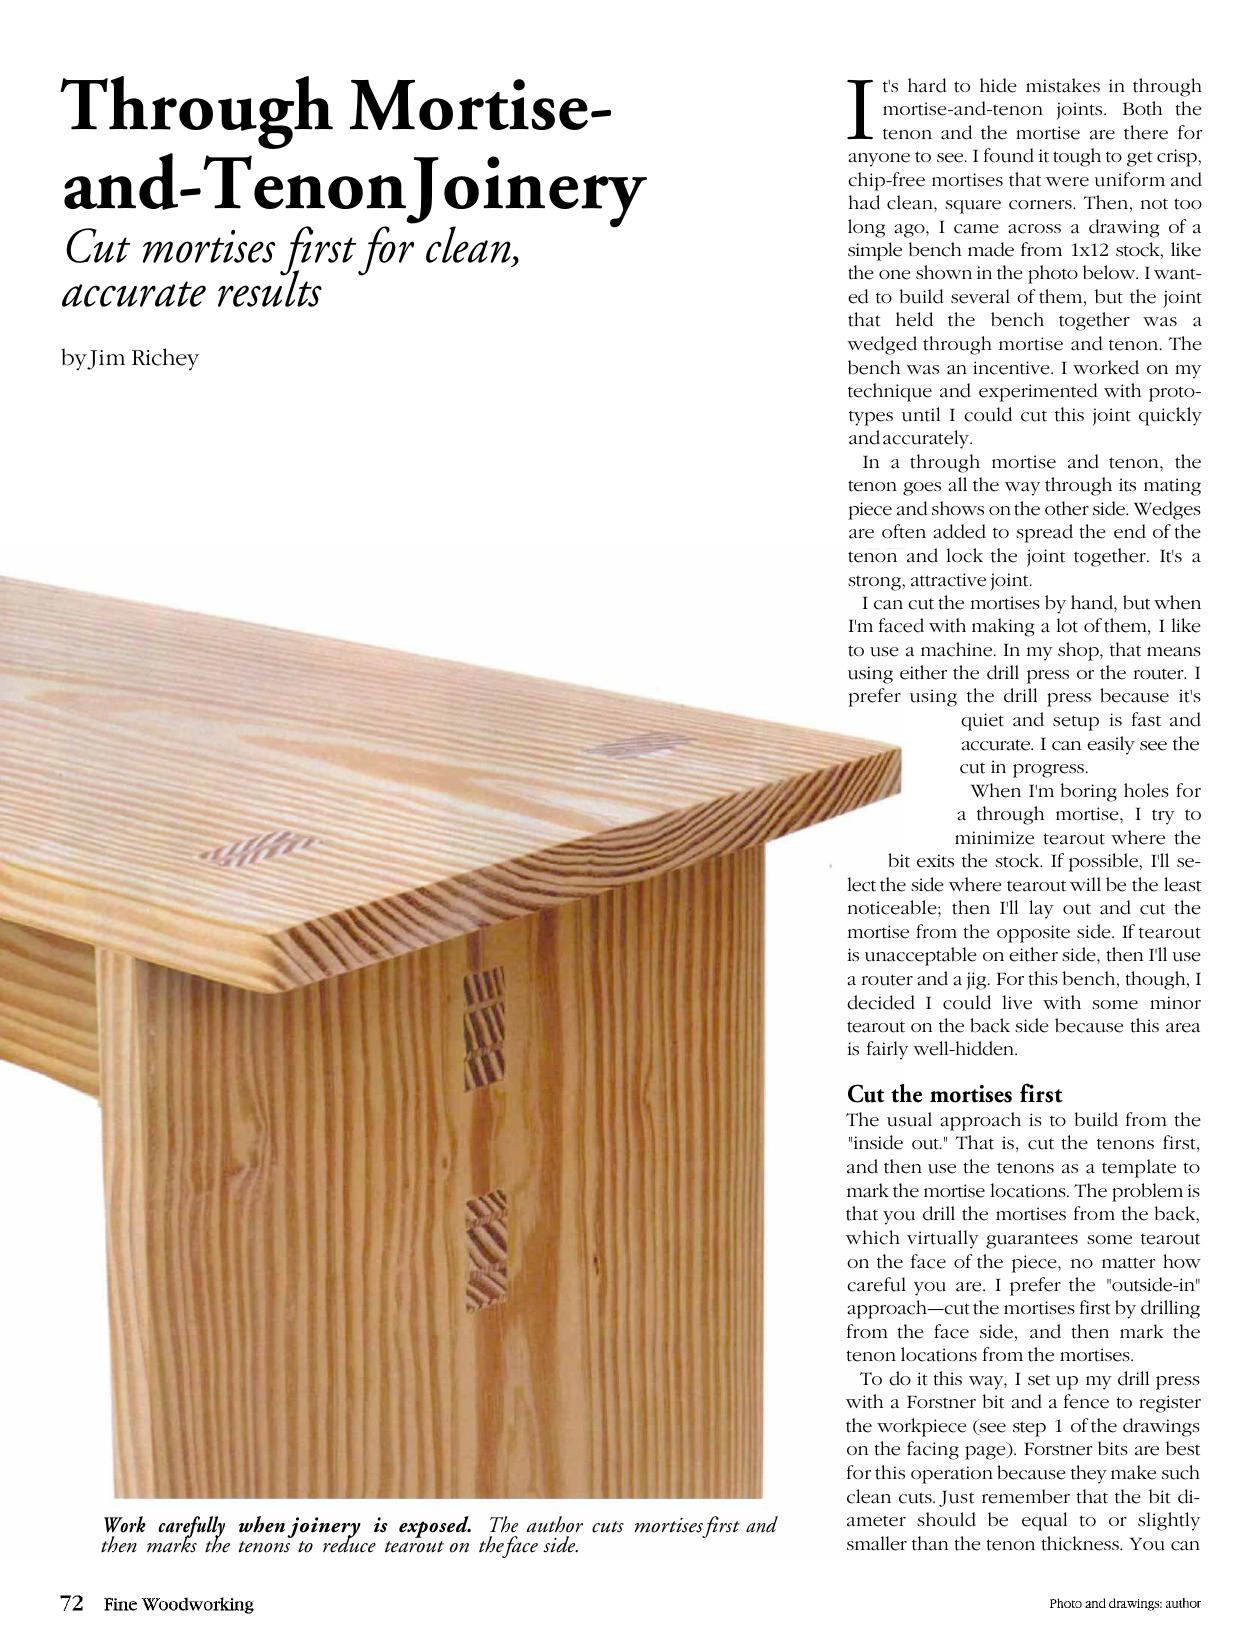 Through Mortise-and-Tenon Joinery by Jim Richey